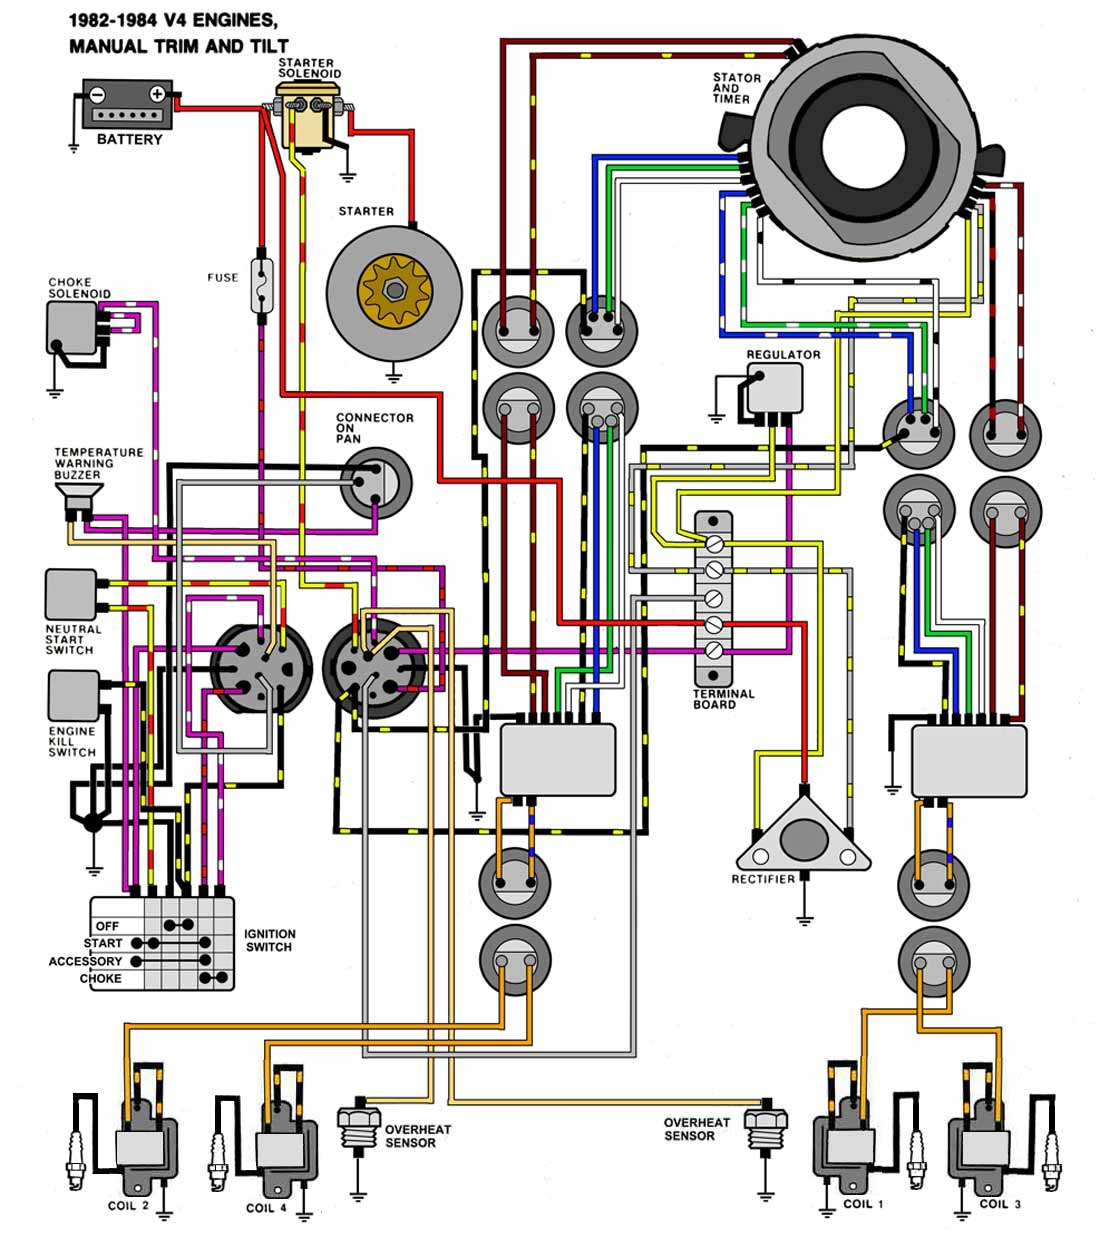 Evinrude Ignition Switch Wiring Diagram 82 F150 Wiring Diagram Wiring Library